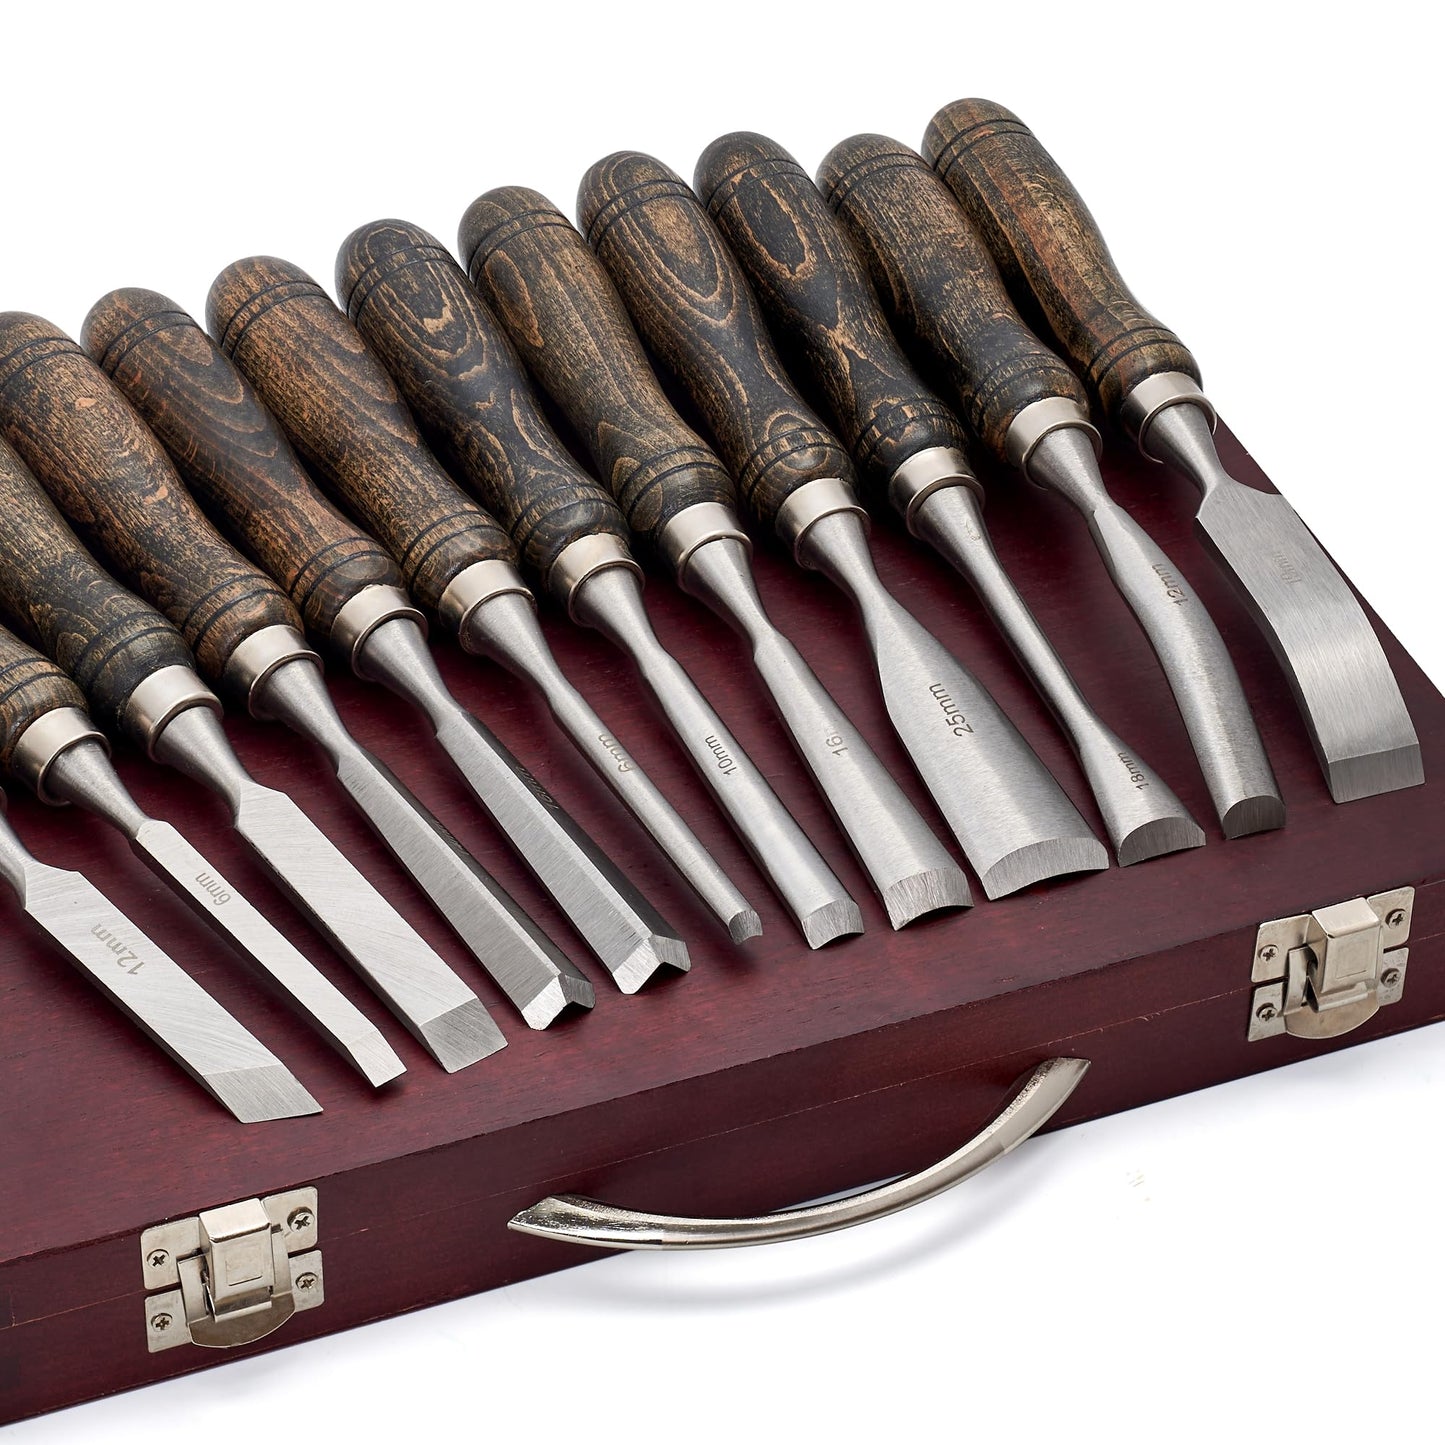 12-Pc. Chisel Set In Wooden Box at